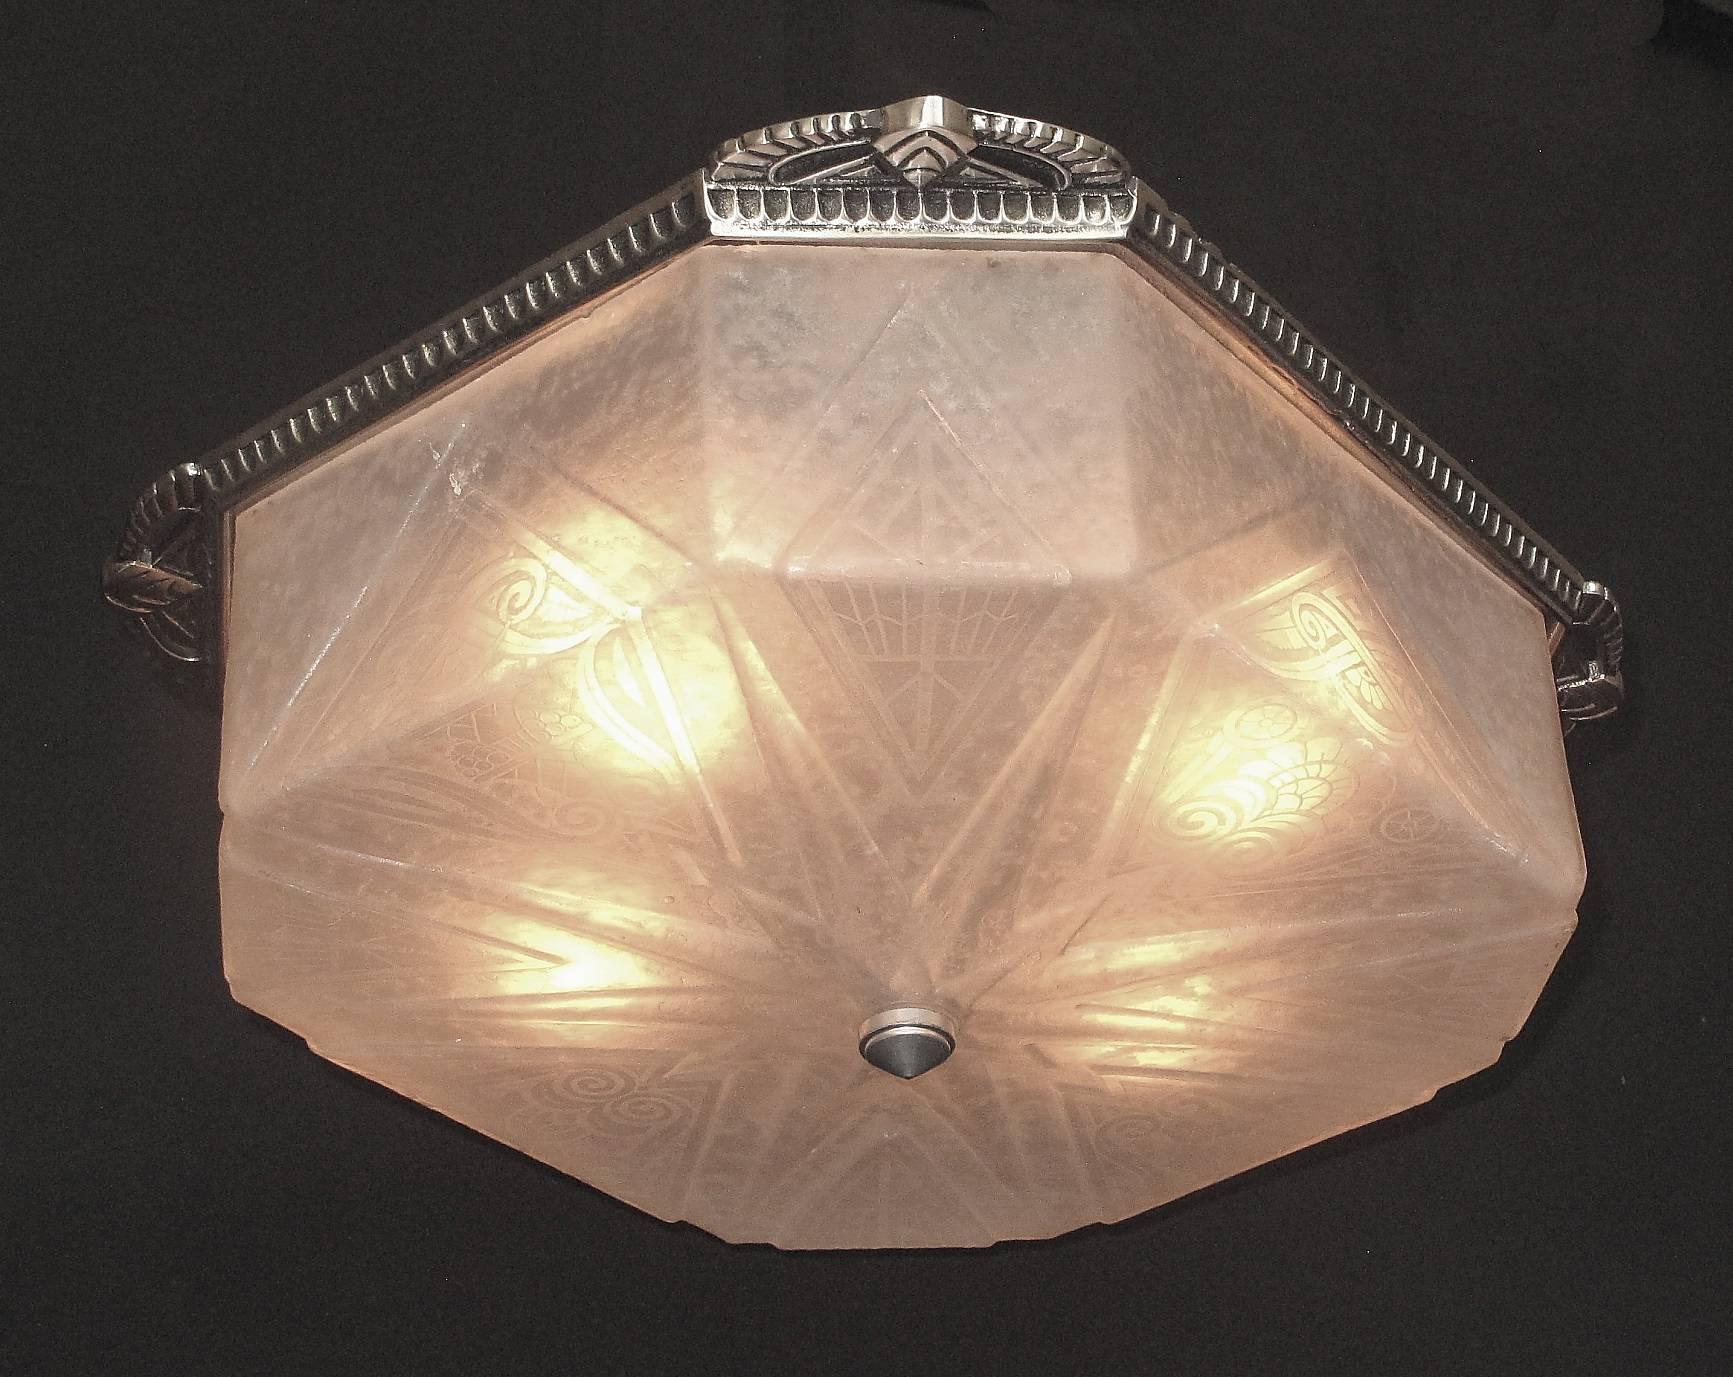 Two available priced each.
Similar to the glass found in the Oviatt Building in Downtown LA by Lalique these are from an old Art Deco Theater in West Virginia. Late 20s flush mount fixture with 4 sockets. The wonderfully designed glass is deeply